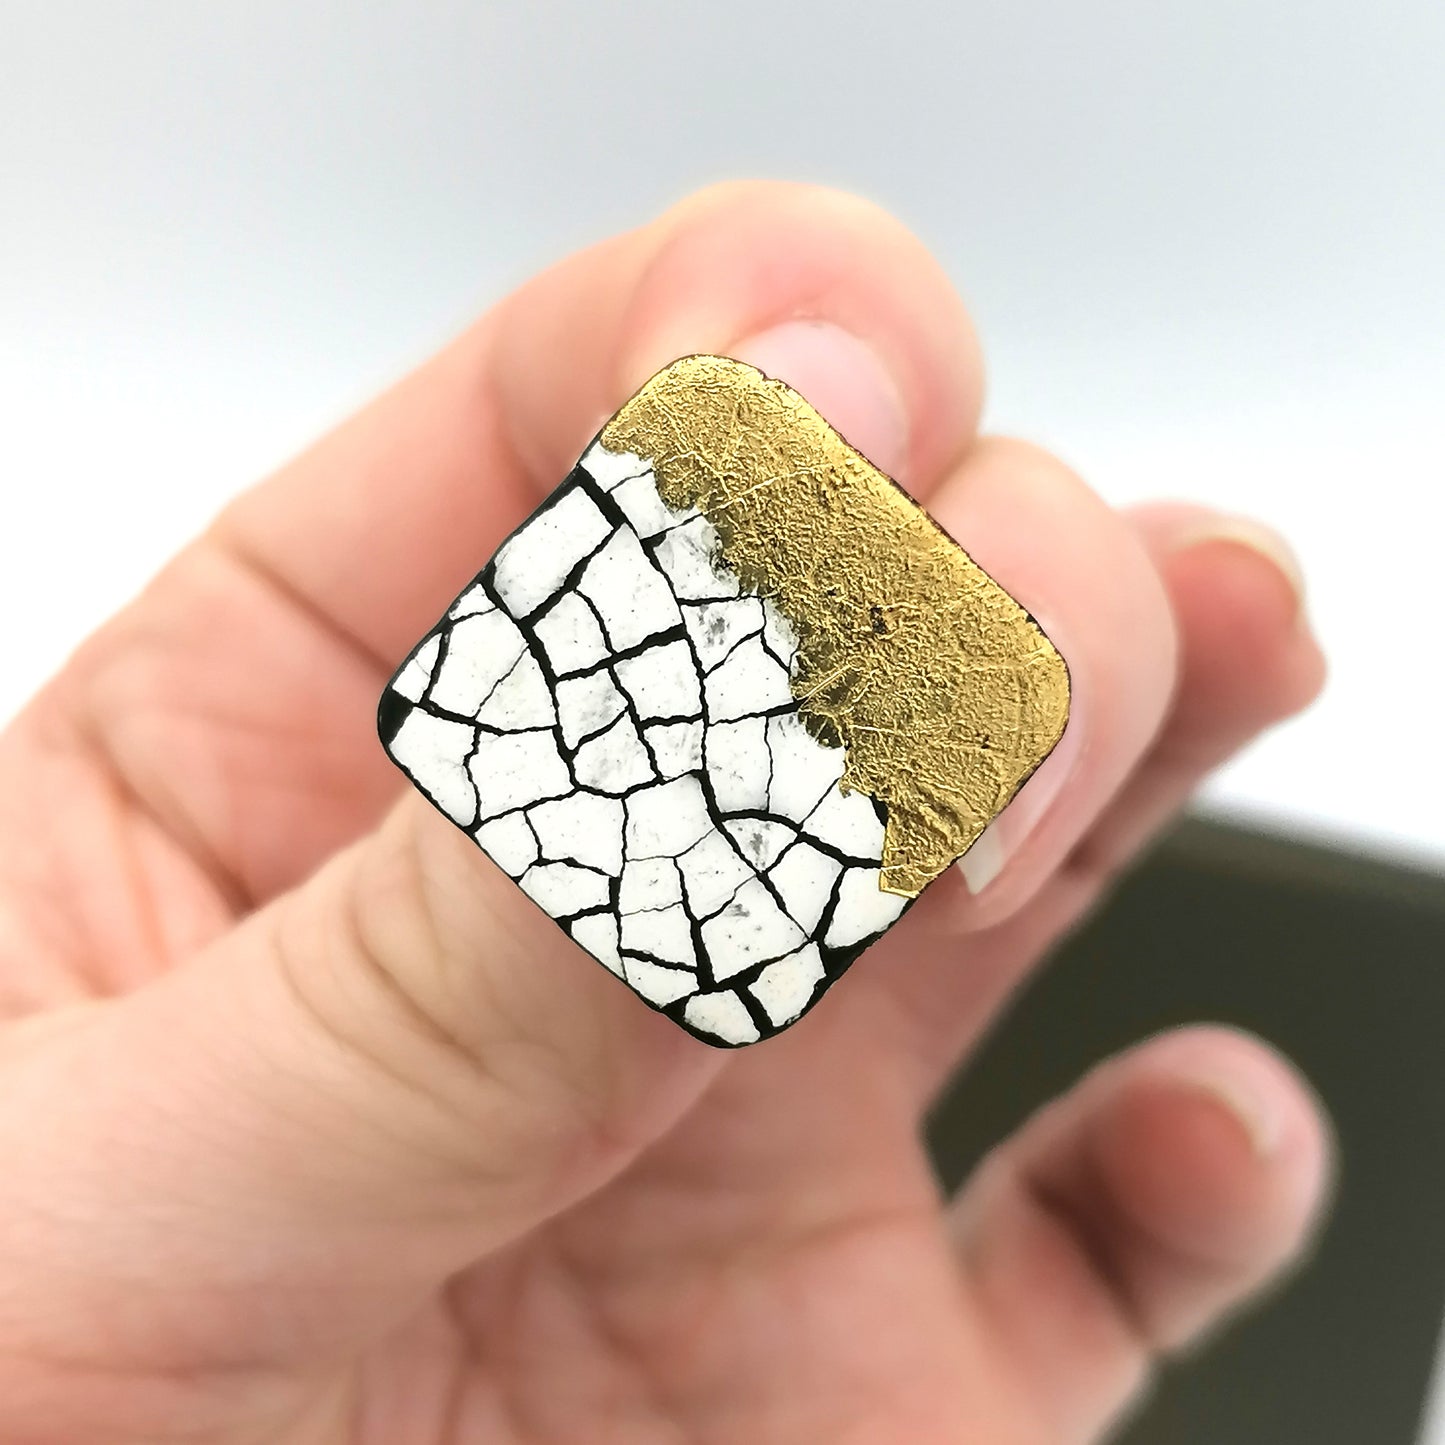 Midi Modern Mosaic square stud earrings with gold leaf